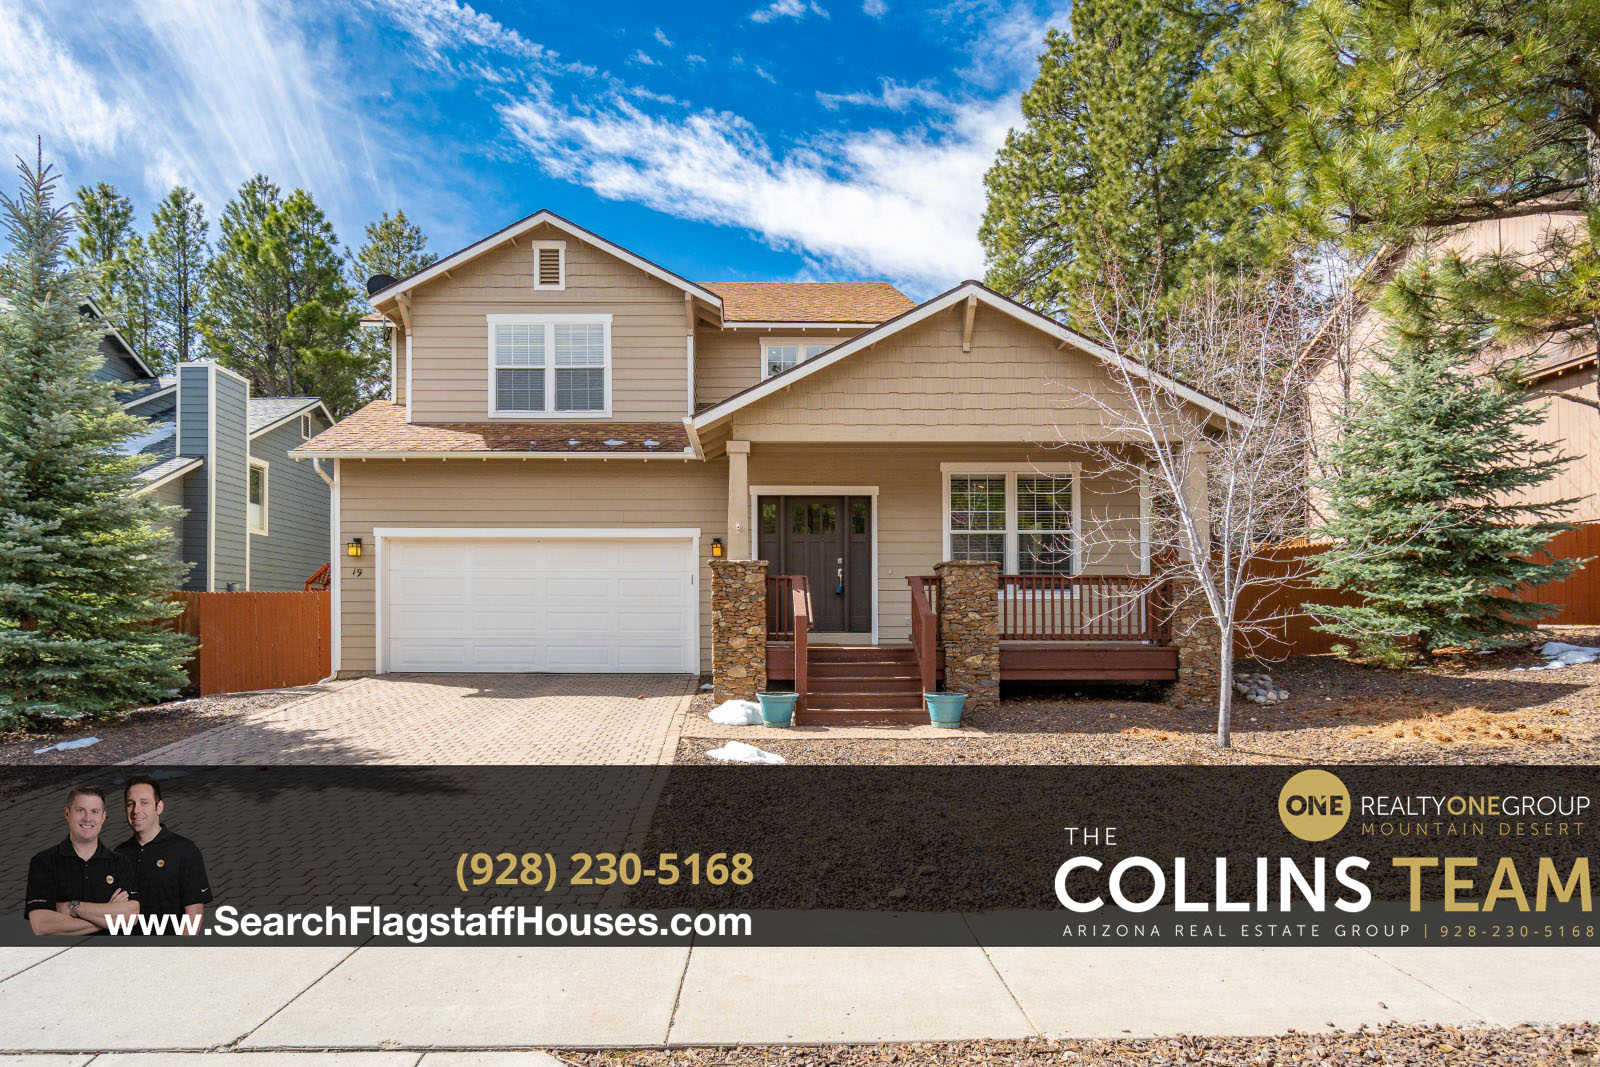 Homes for Sale in Ponderosa Trails Flagstaff - 19 E Separation Canyon Trl